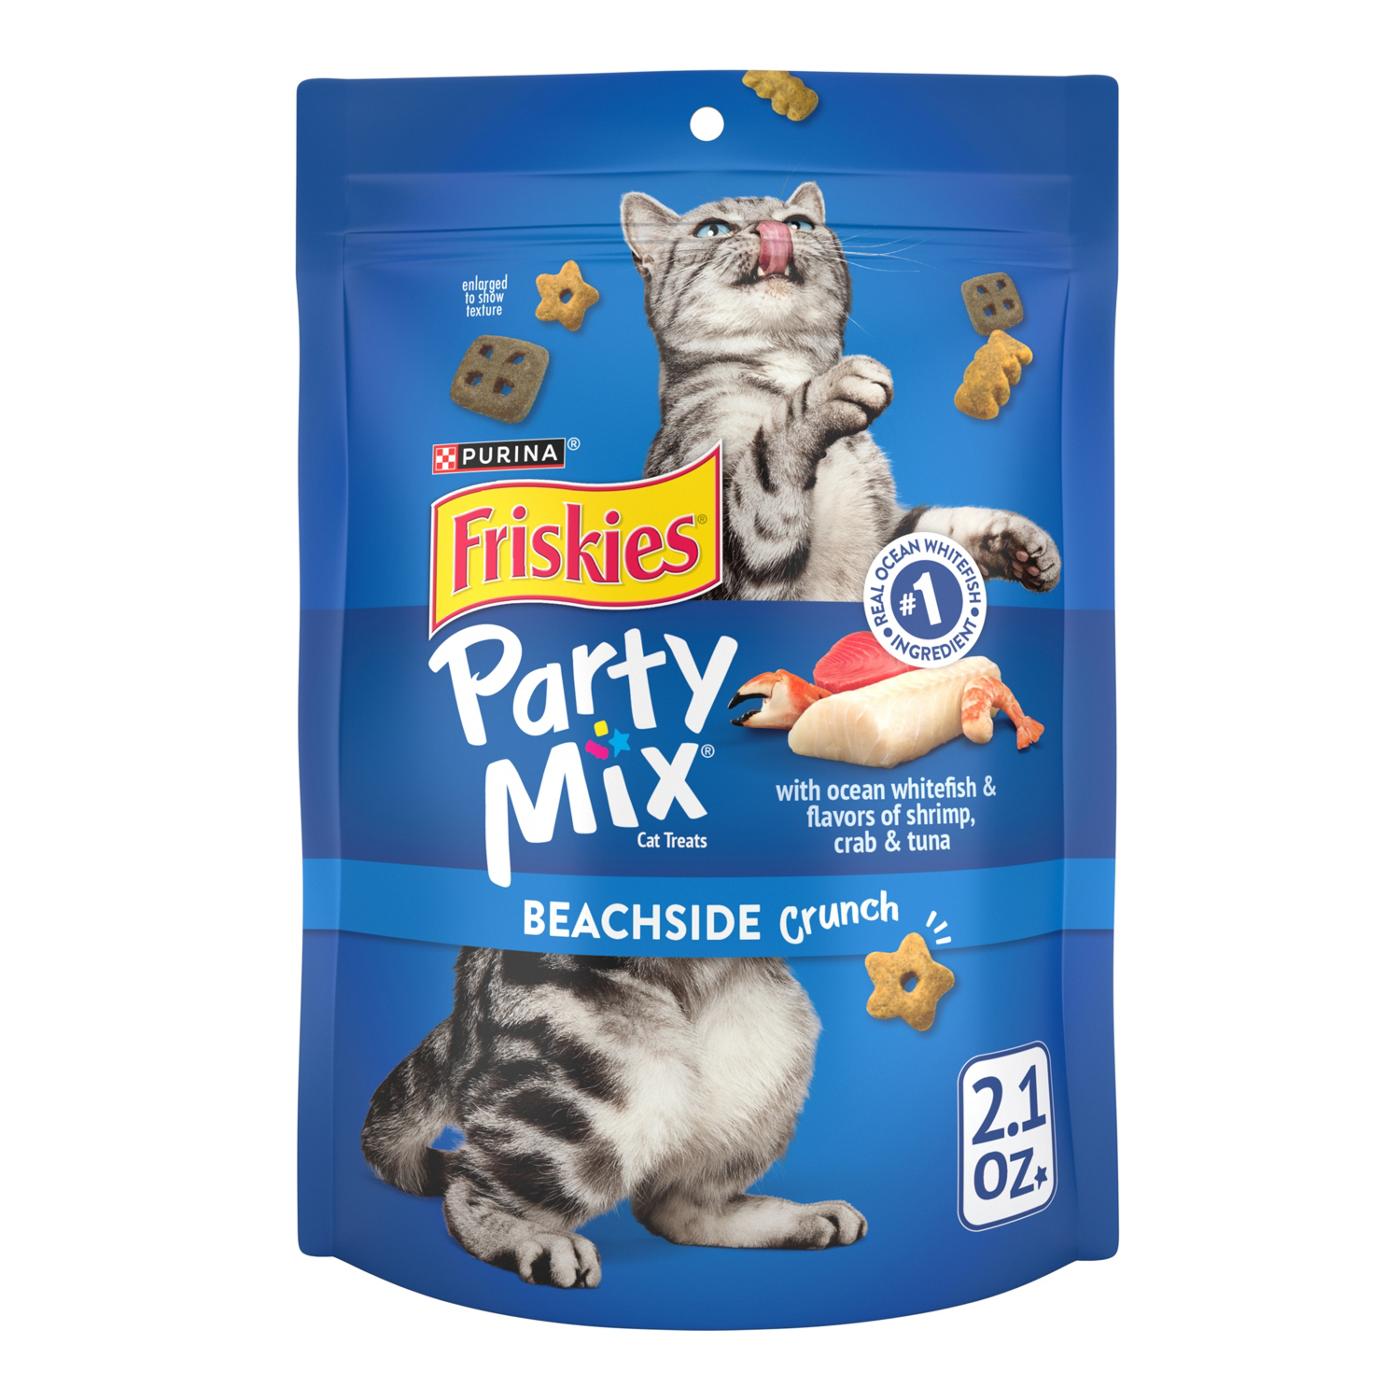 Friskies Purina Friskies Made in USA Facilities Cat Treats, Party Mix Beachside Crunch; image 1 of 9